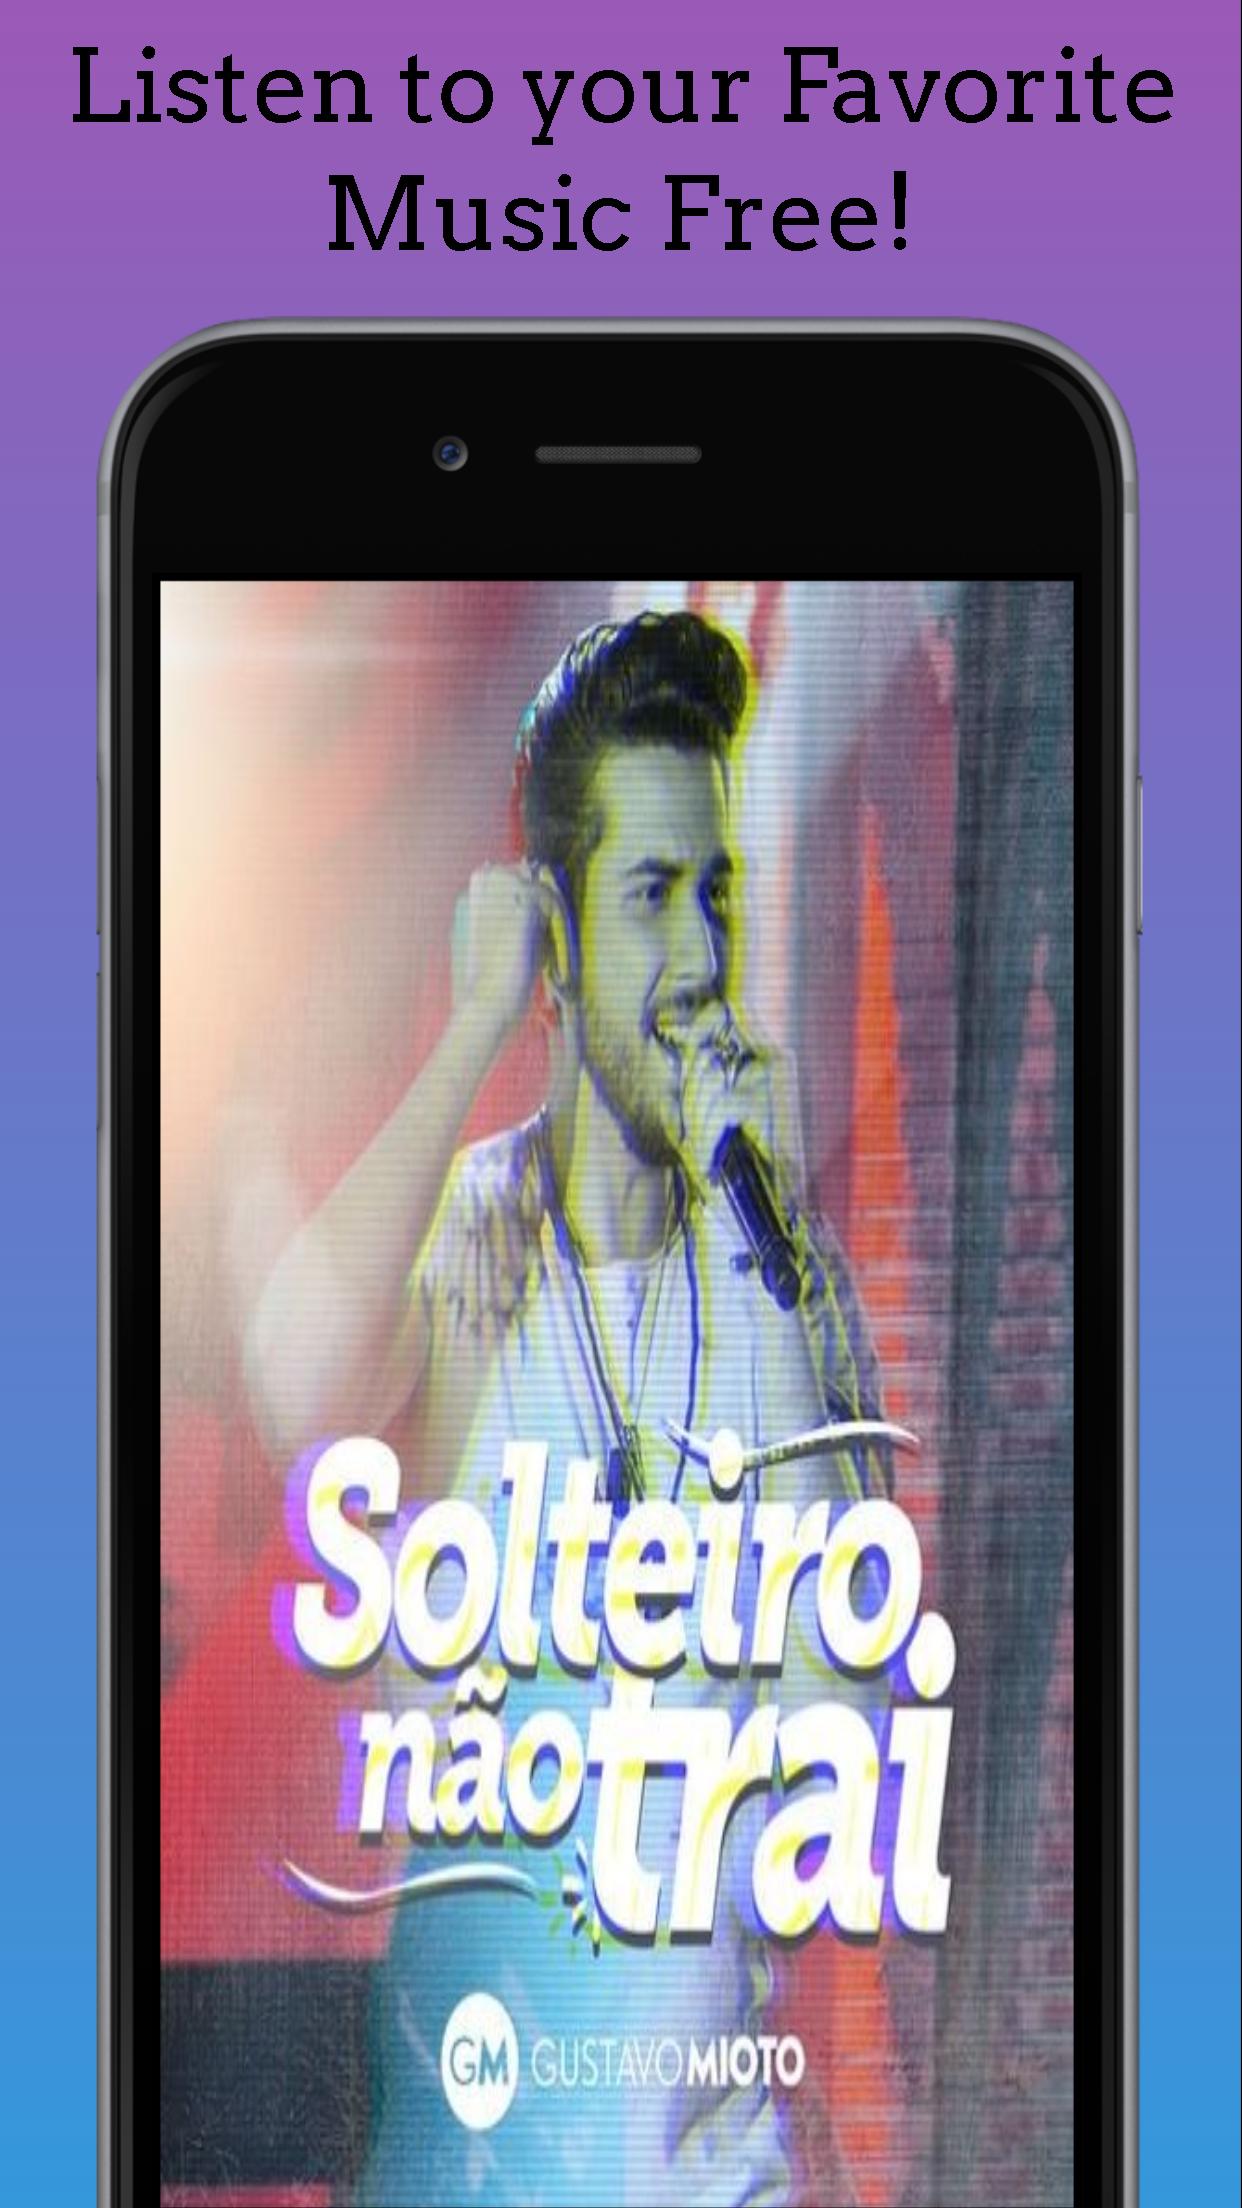 Gustavo Mioto Mp3 Songs Free Download Without Wifi For Android Apk Download